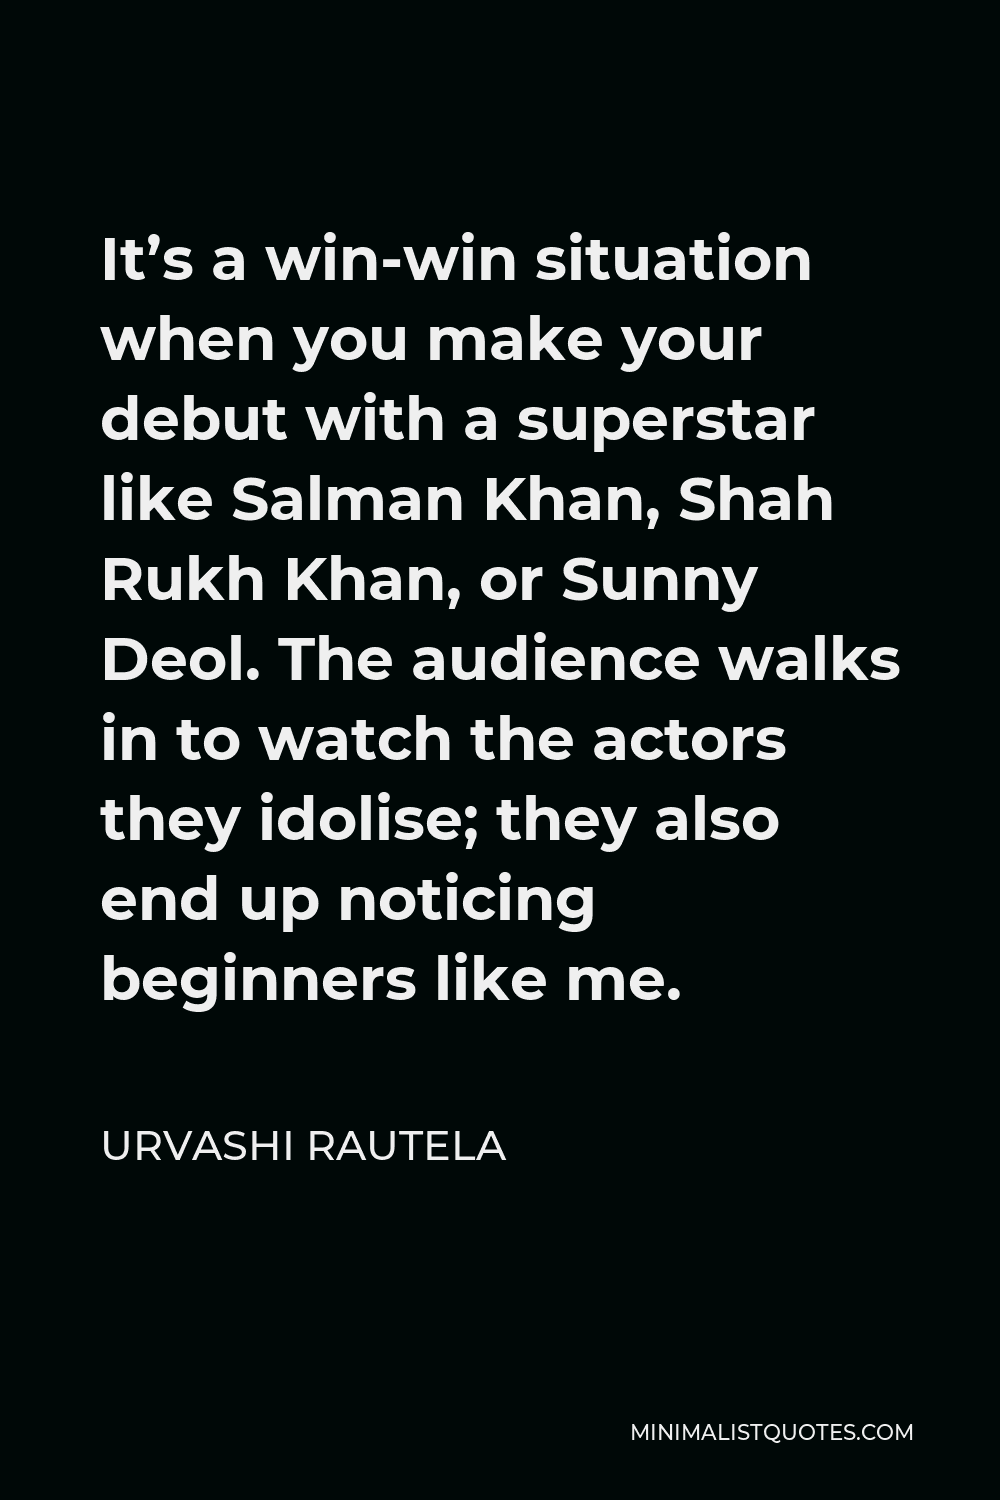 Urvashi Rautela Quote - It’s a win-win situation when you make your debut with a superstar like Salman Khan, Shah Rukh Khan, or Sunny Deol. The audience walks in to watch the actors they idolise; they also end up noticing beginners like me.